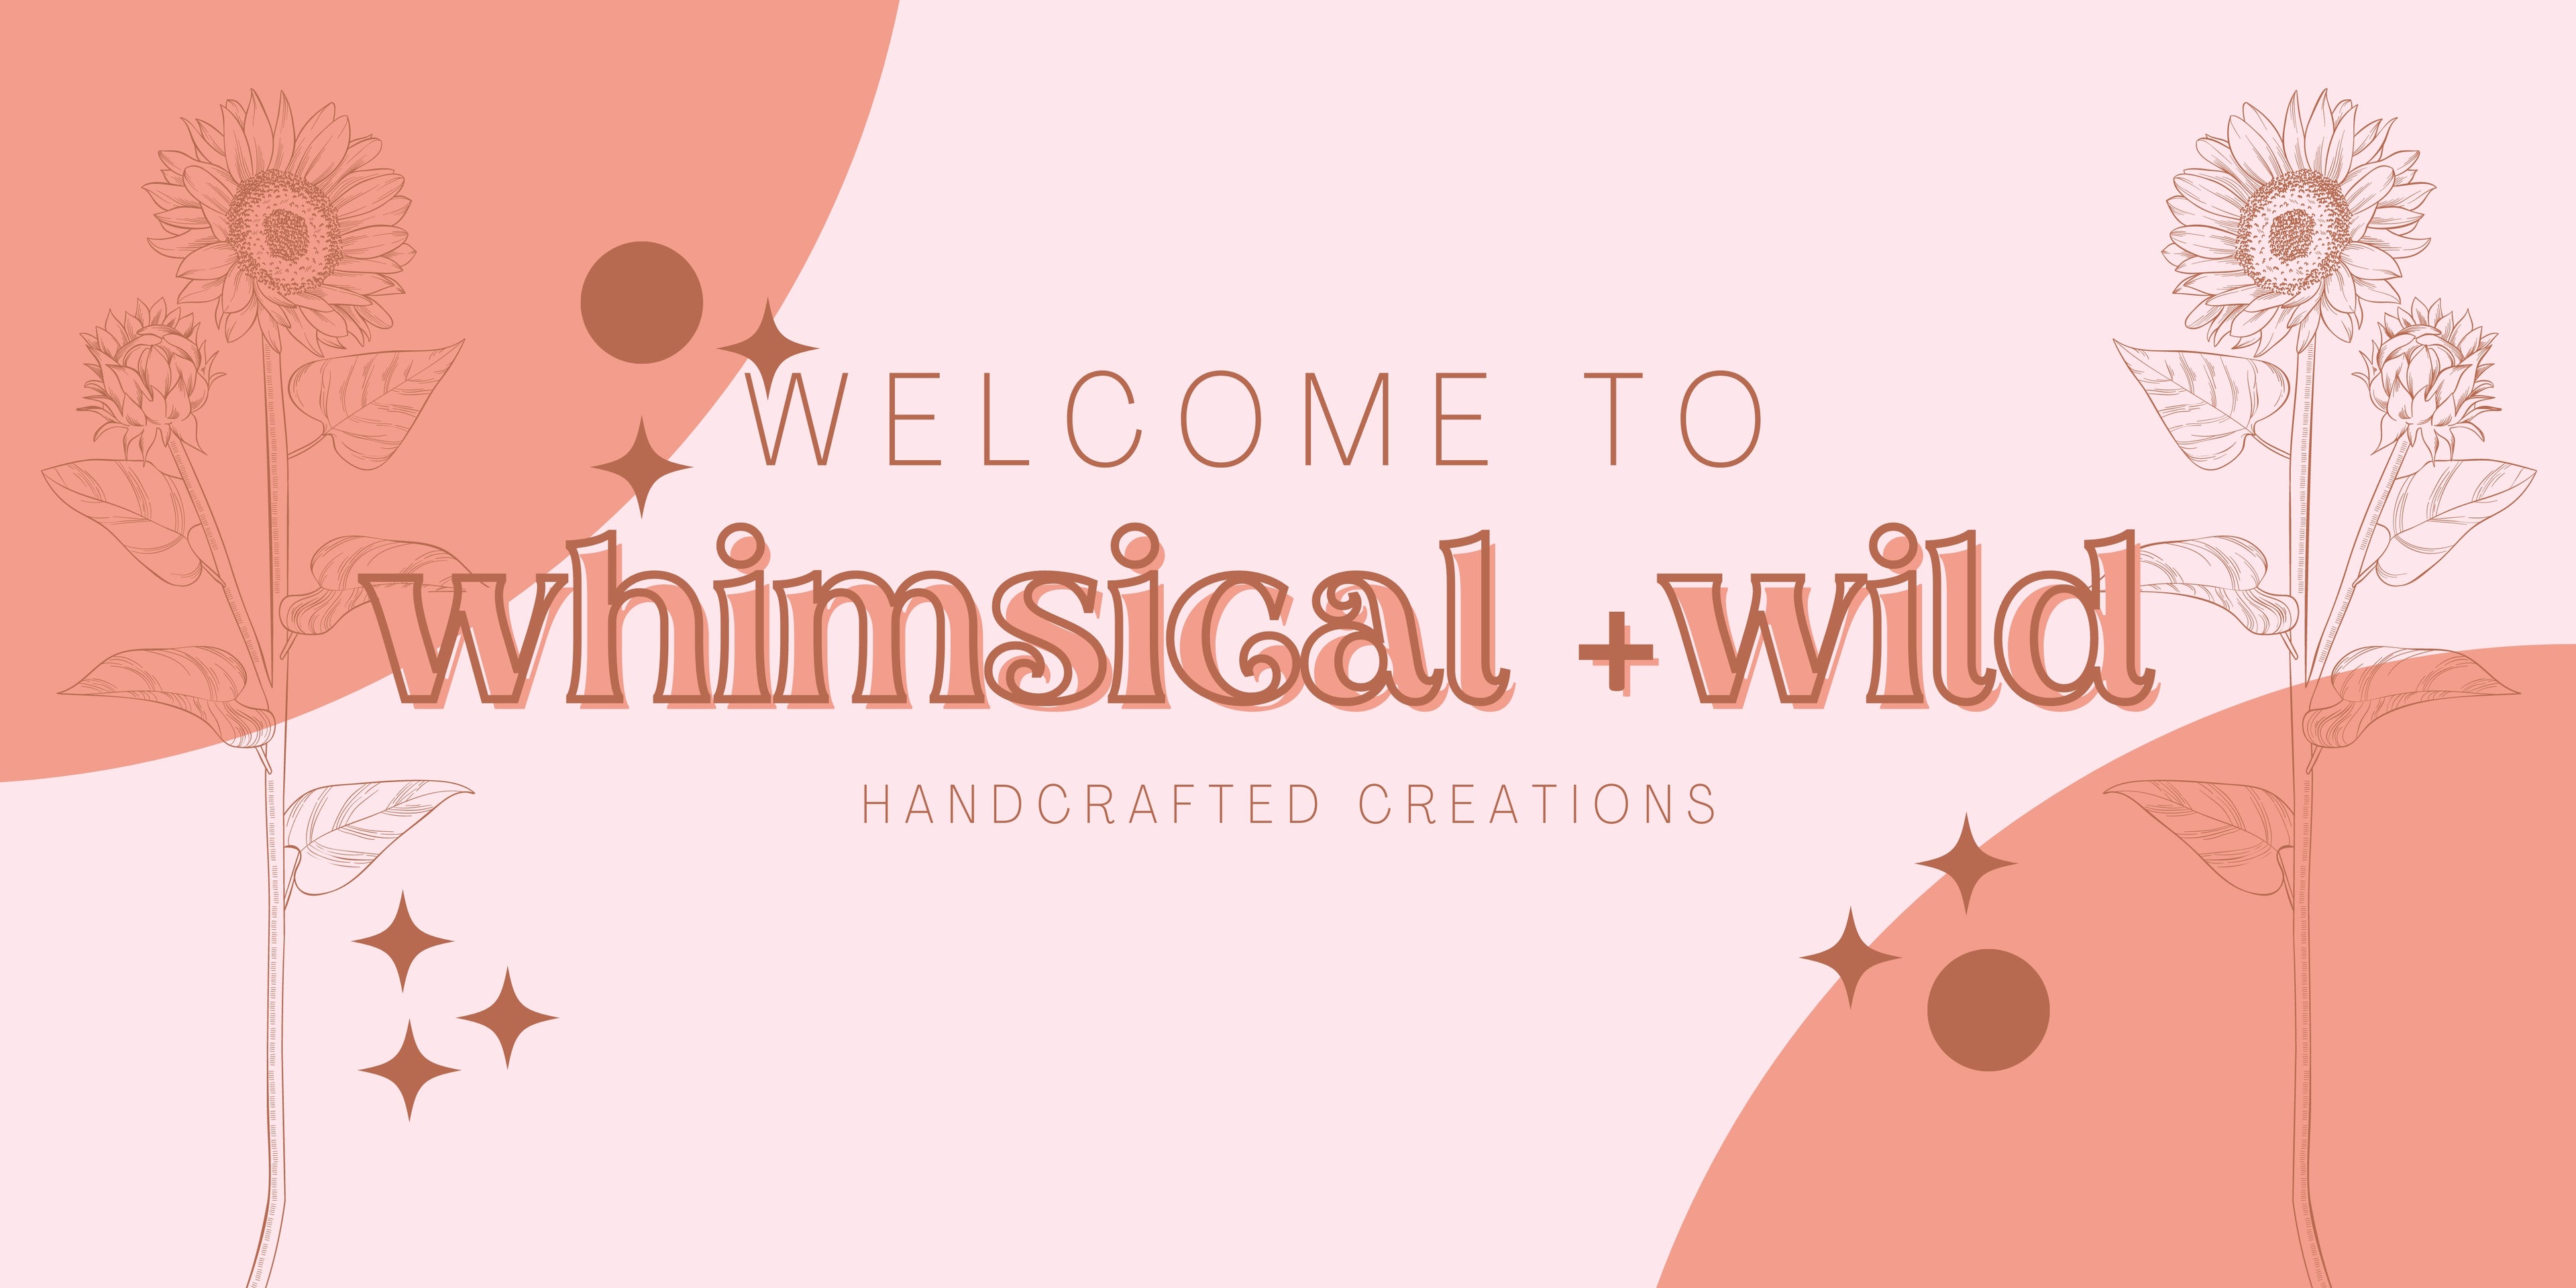 Graphic that says "Welcome to Whimsical and Wild; Handcrafted Creations" with sunflowers on both sides of the image